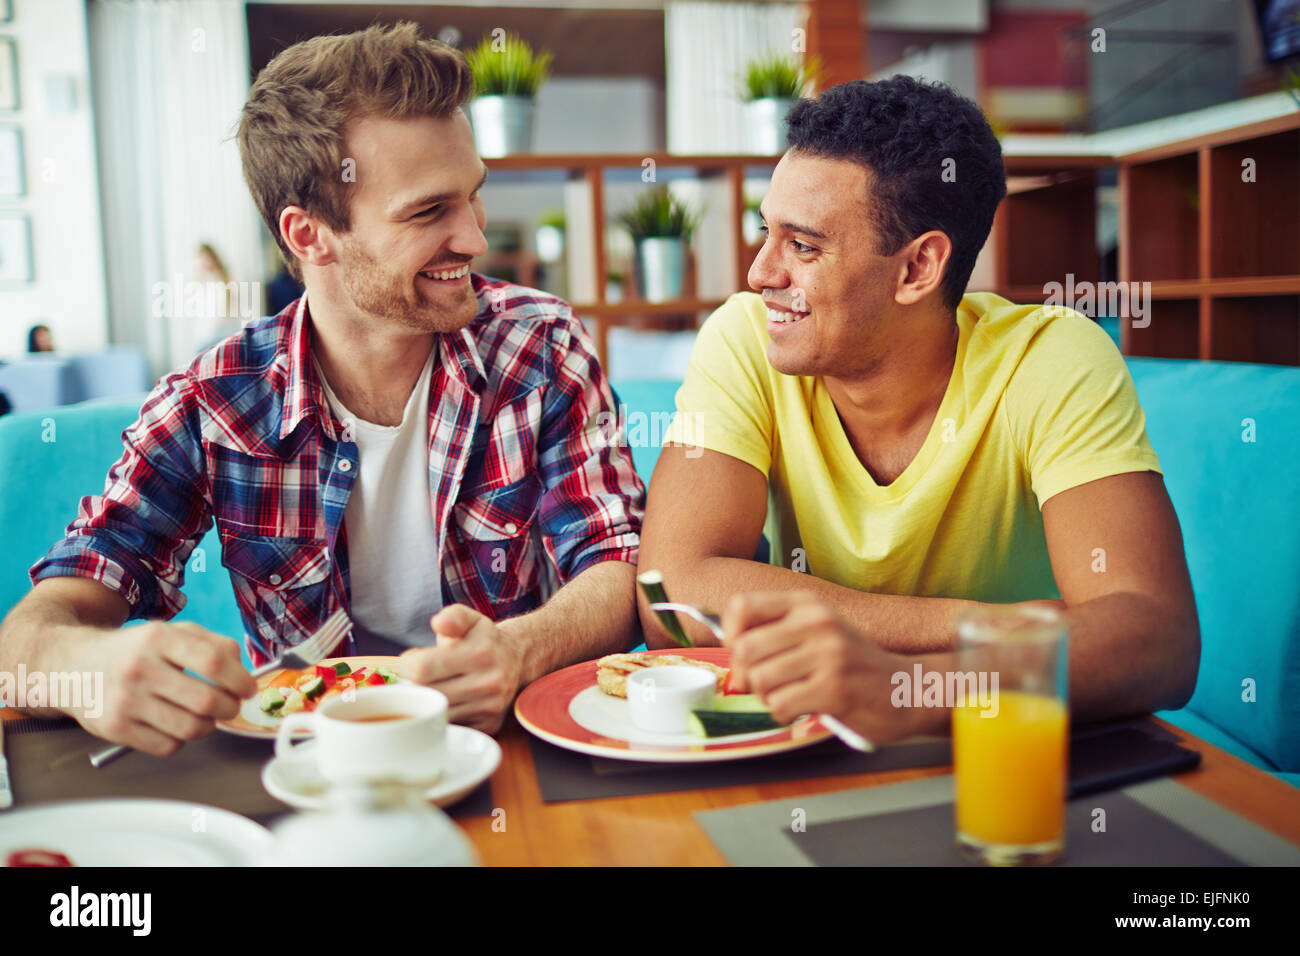 Two men eating and looking at each other Stock Photo